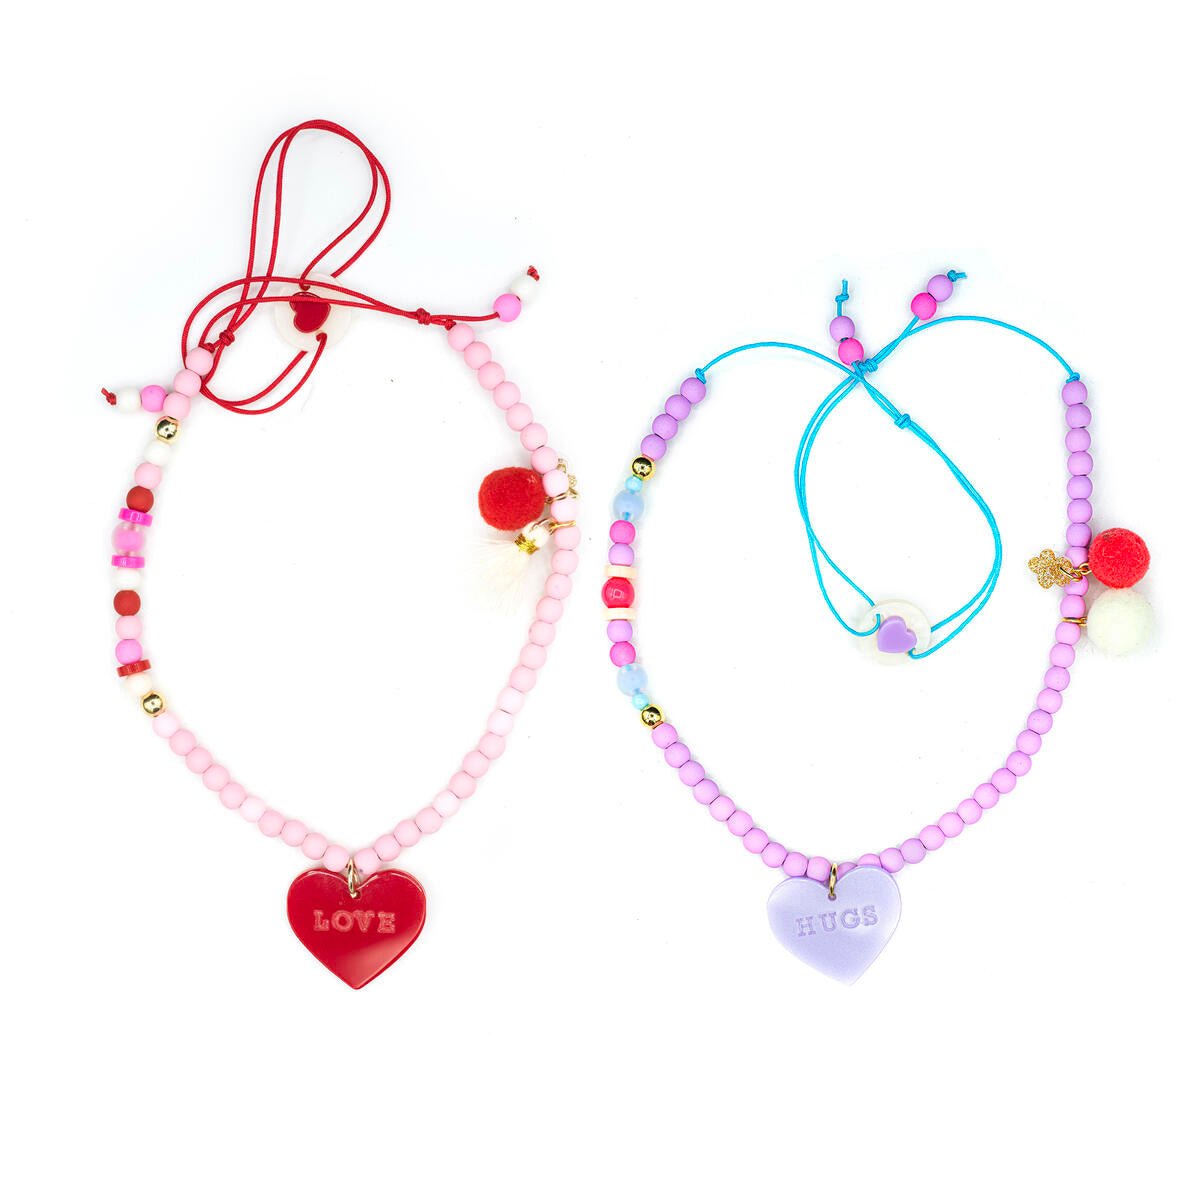 HEARTS NECKLACE SET - LILIES & ROSES